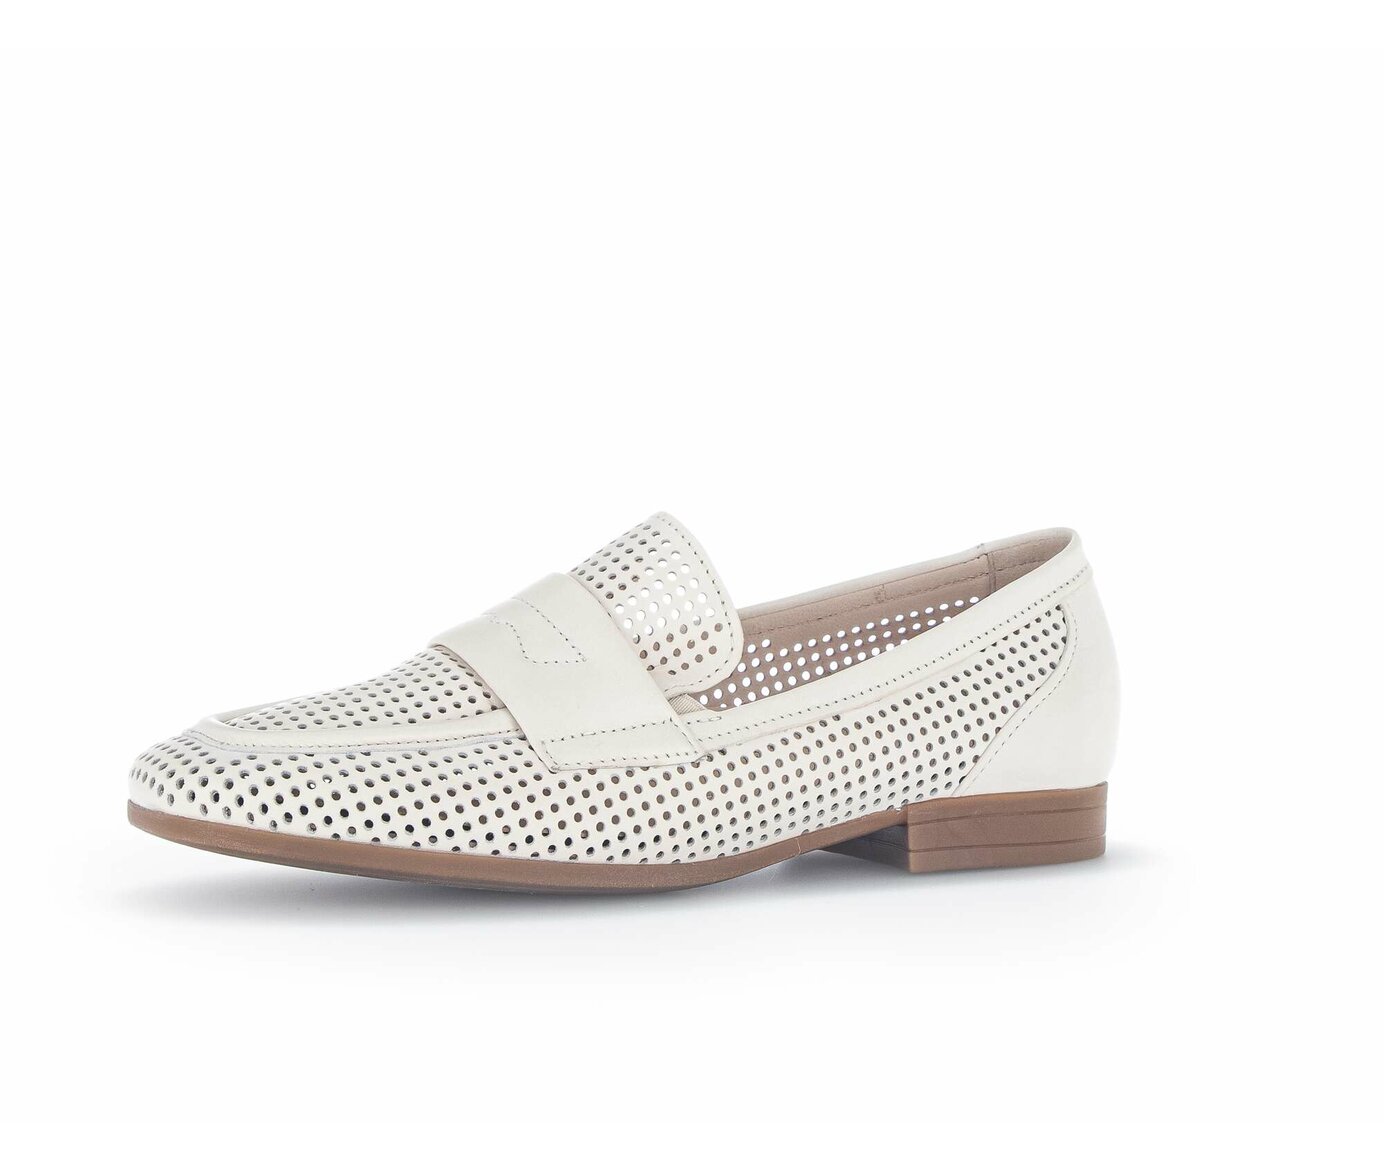 Gabor Perforated Loafer